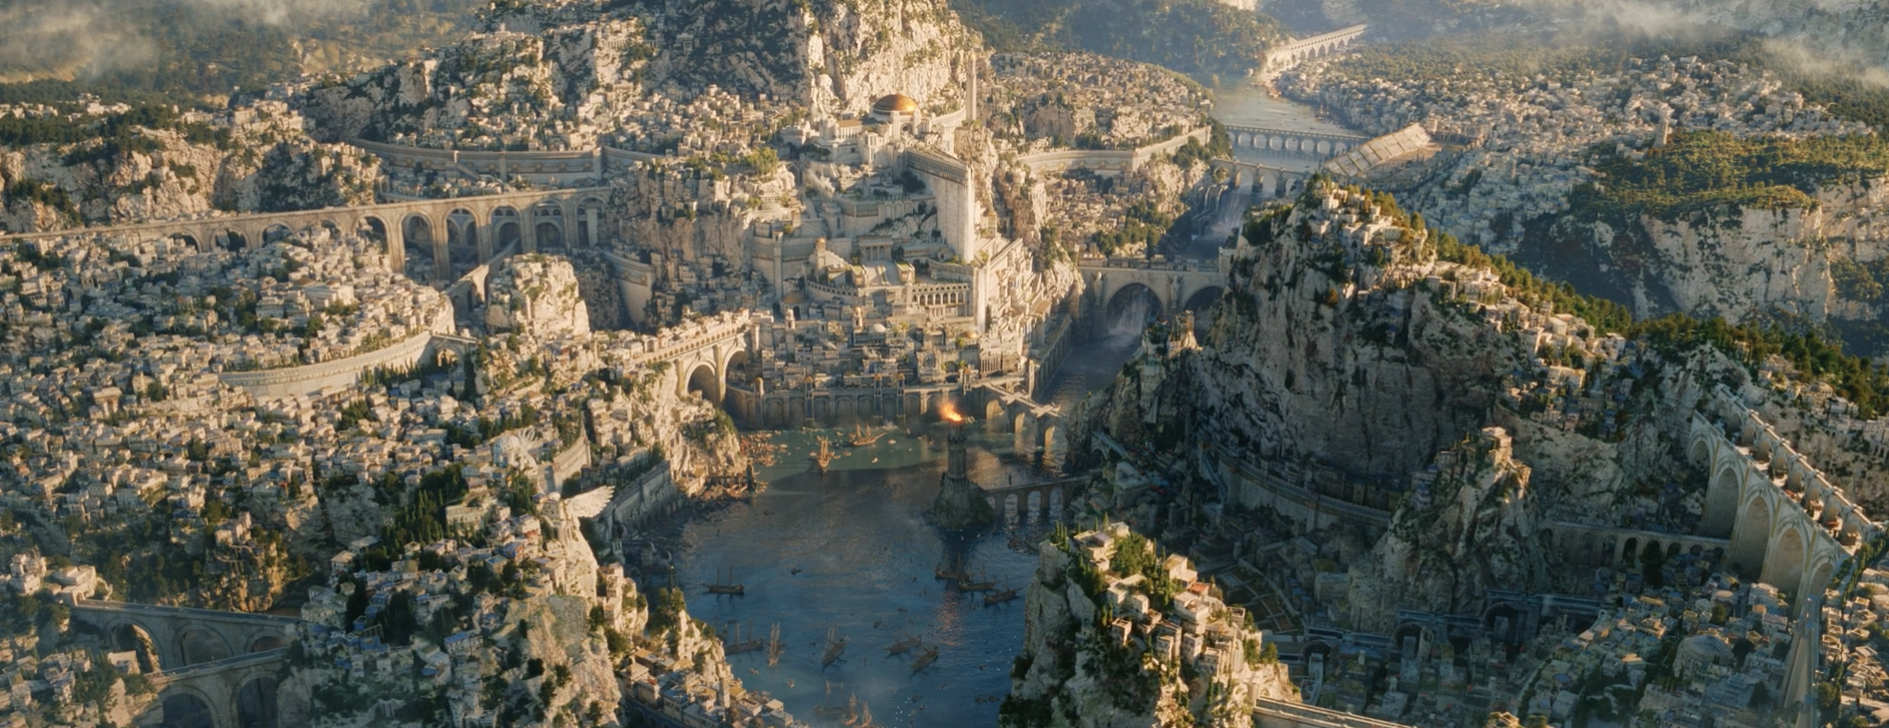 City on Numenor 2.png